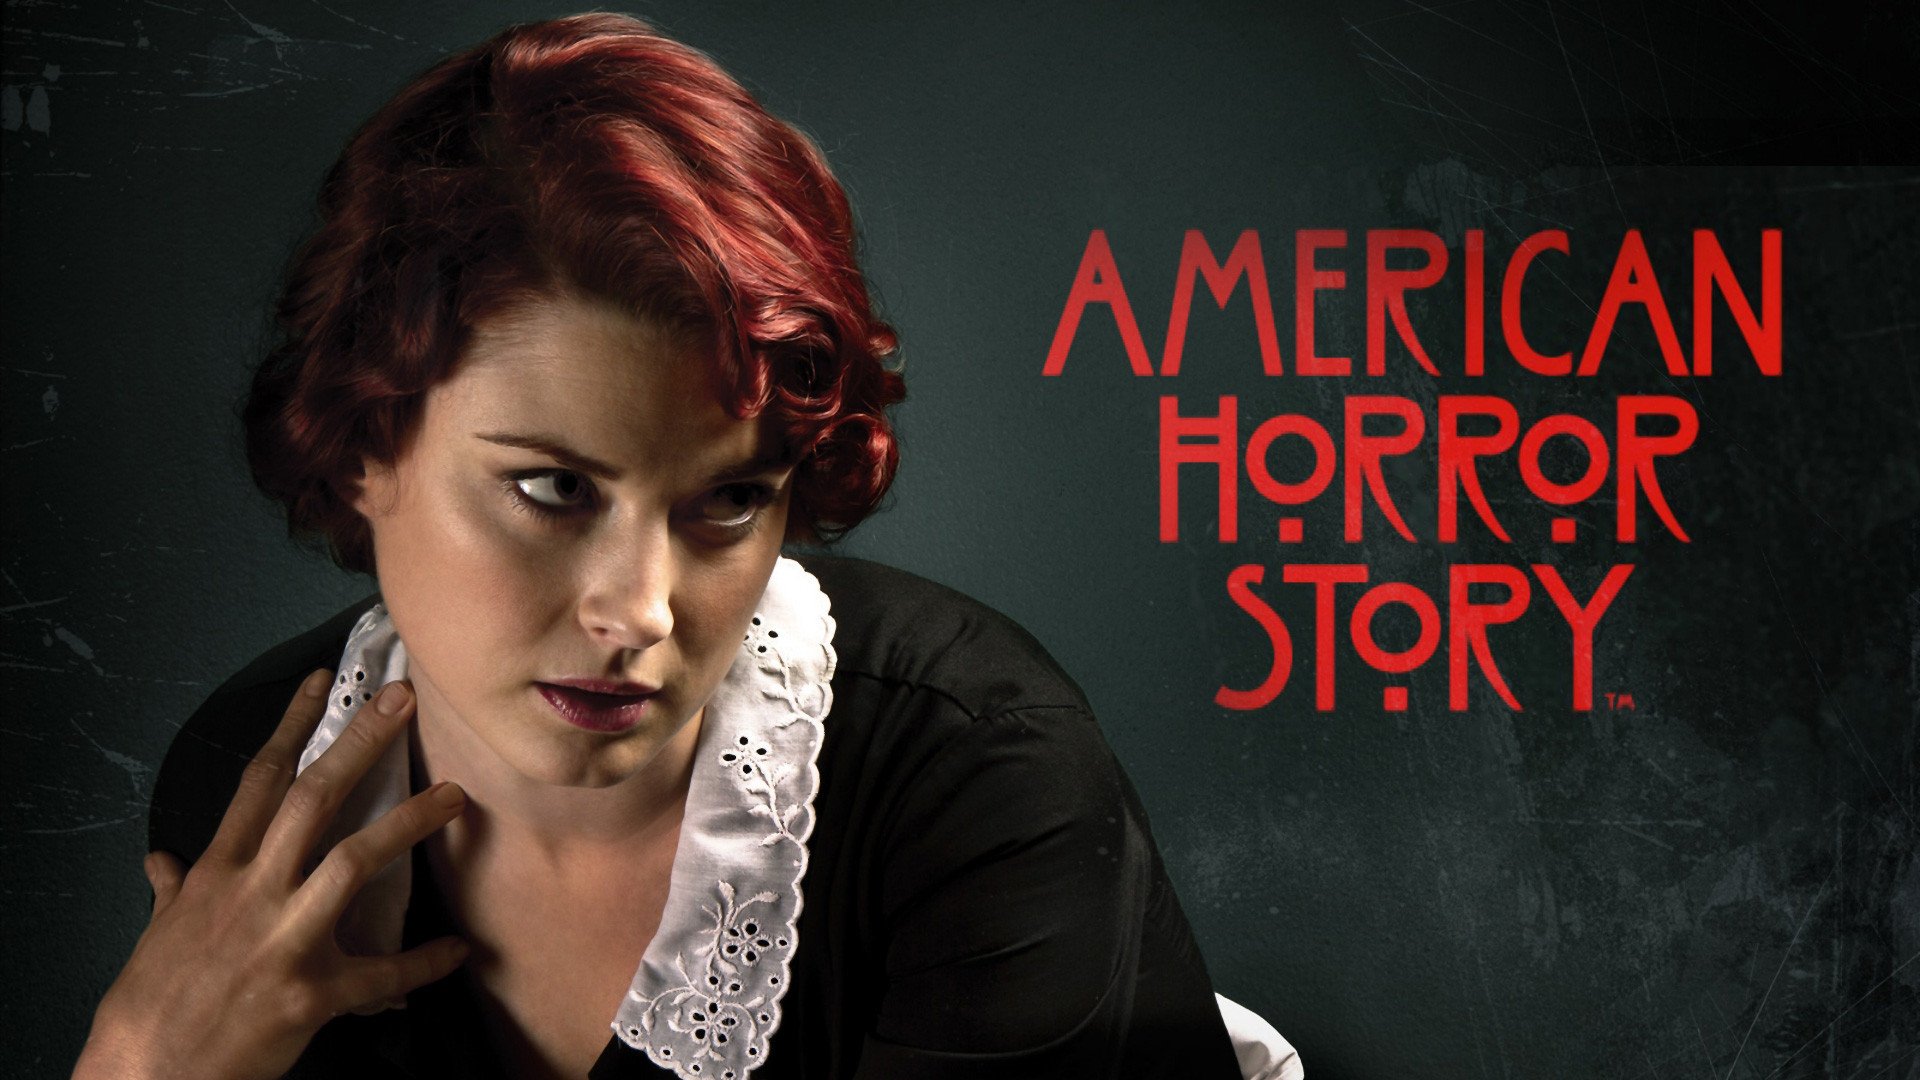 wallpaper american horror story,font,photography,red hair,gesture